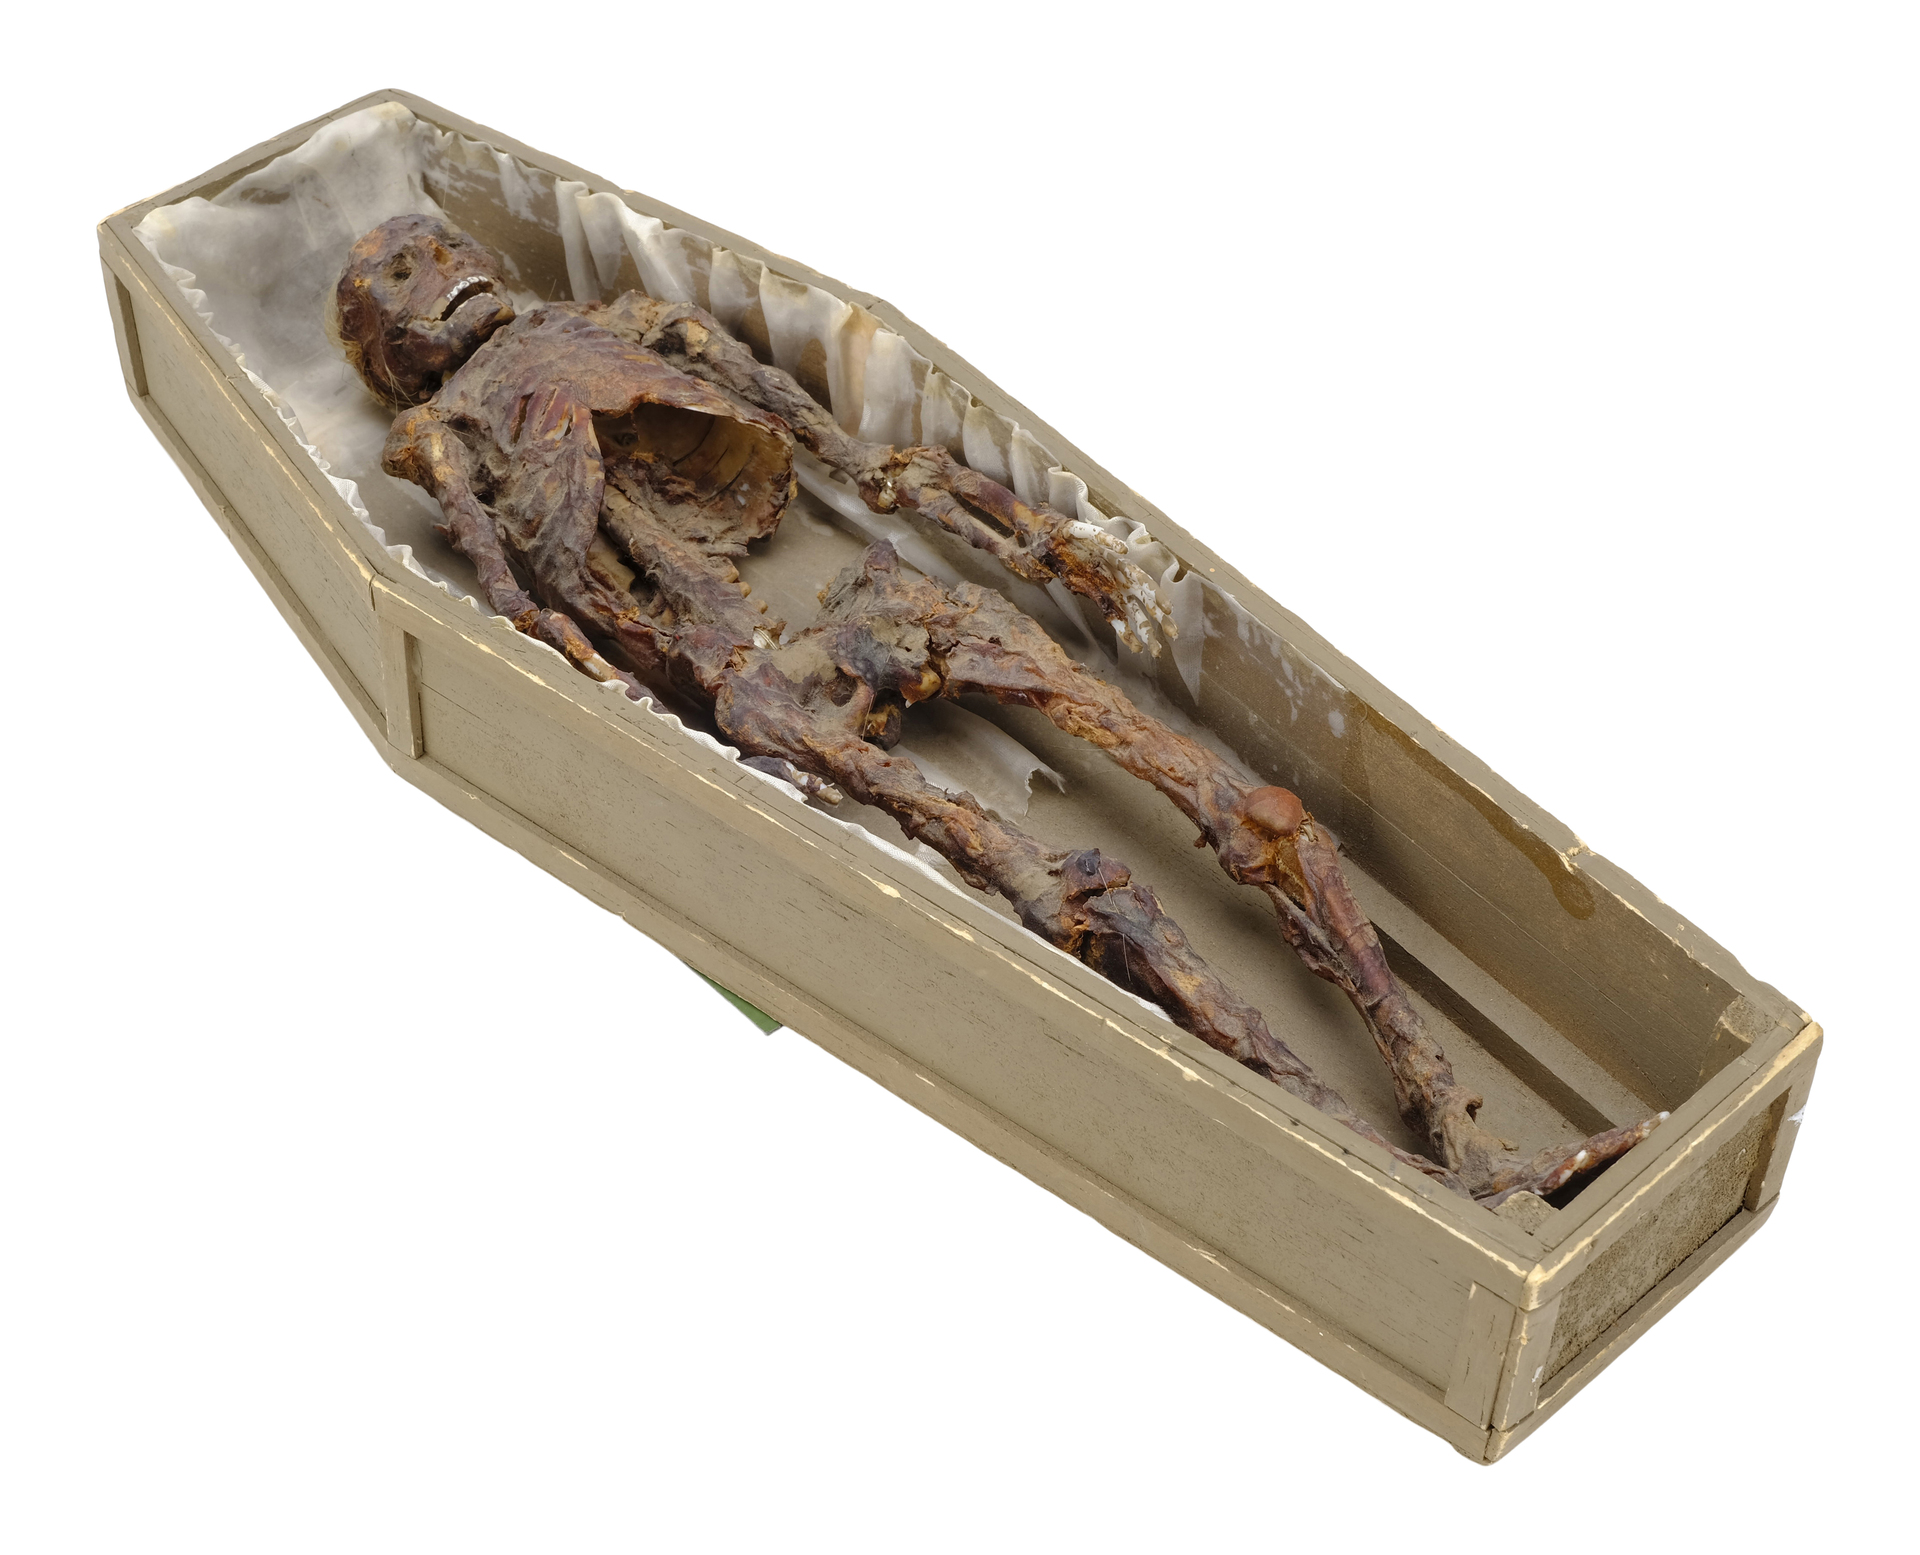 POLTERGEIST (1982) - Desiccated Corpse in Coffin Model Miniature - Image 3 of 7